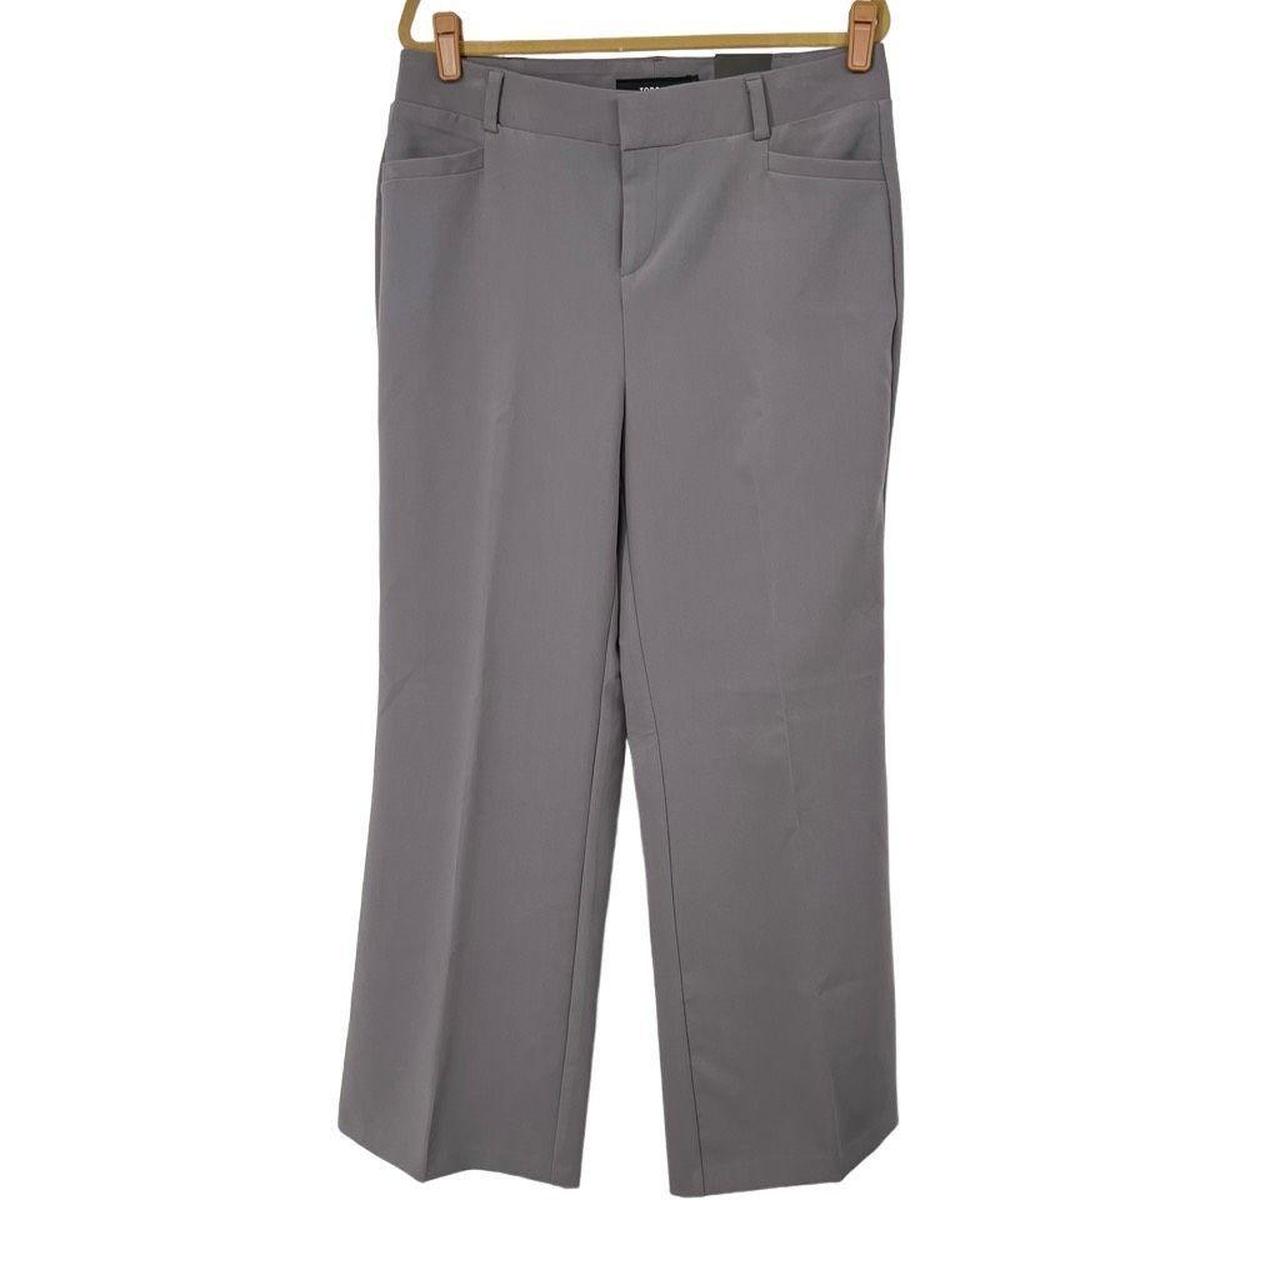 Size 10 gray trousers